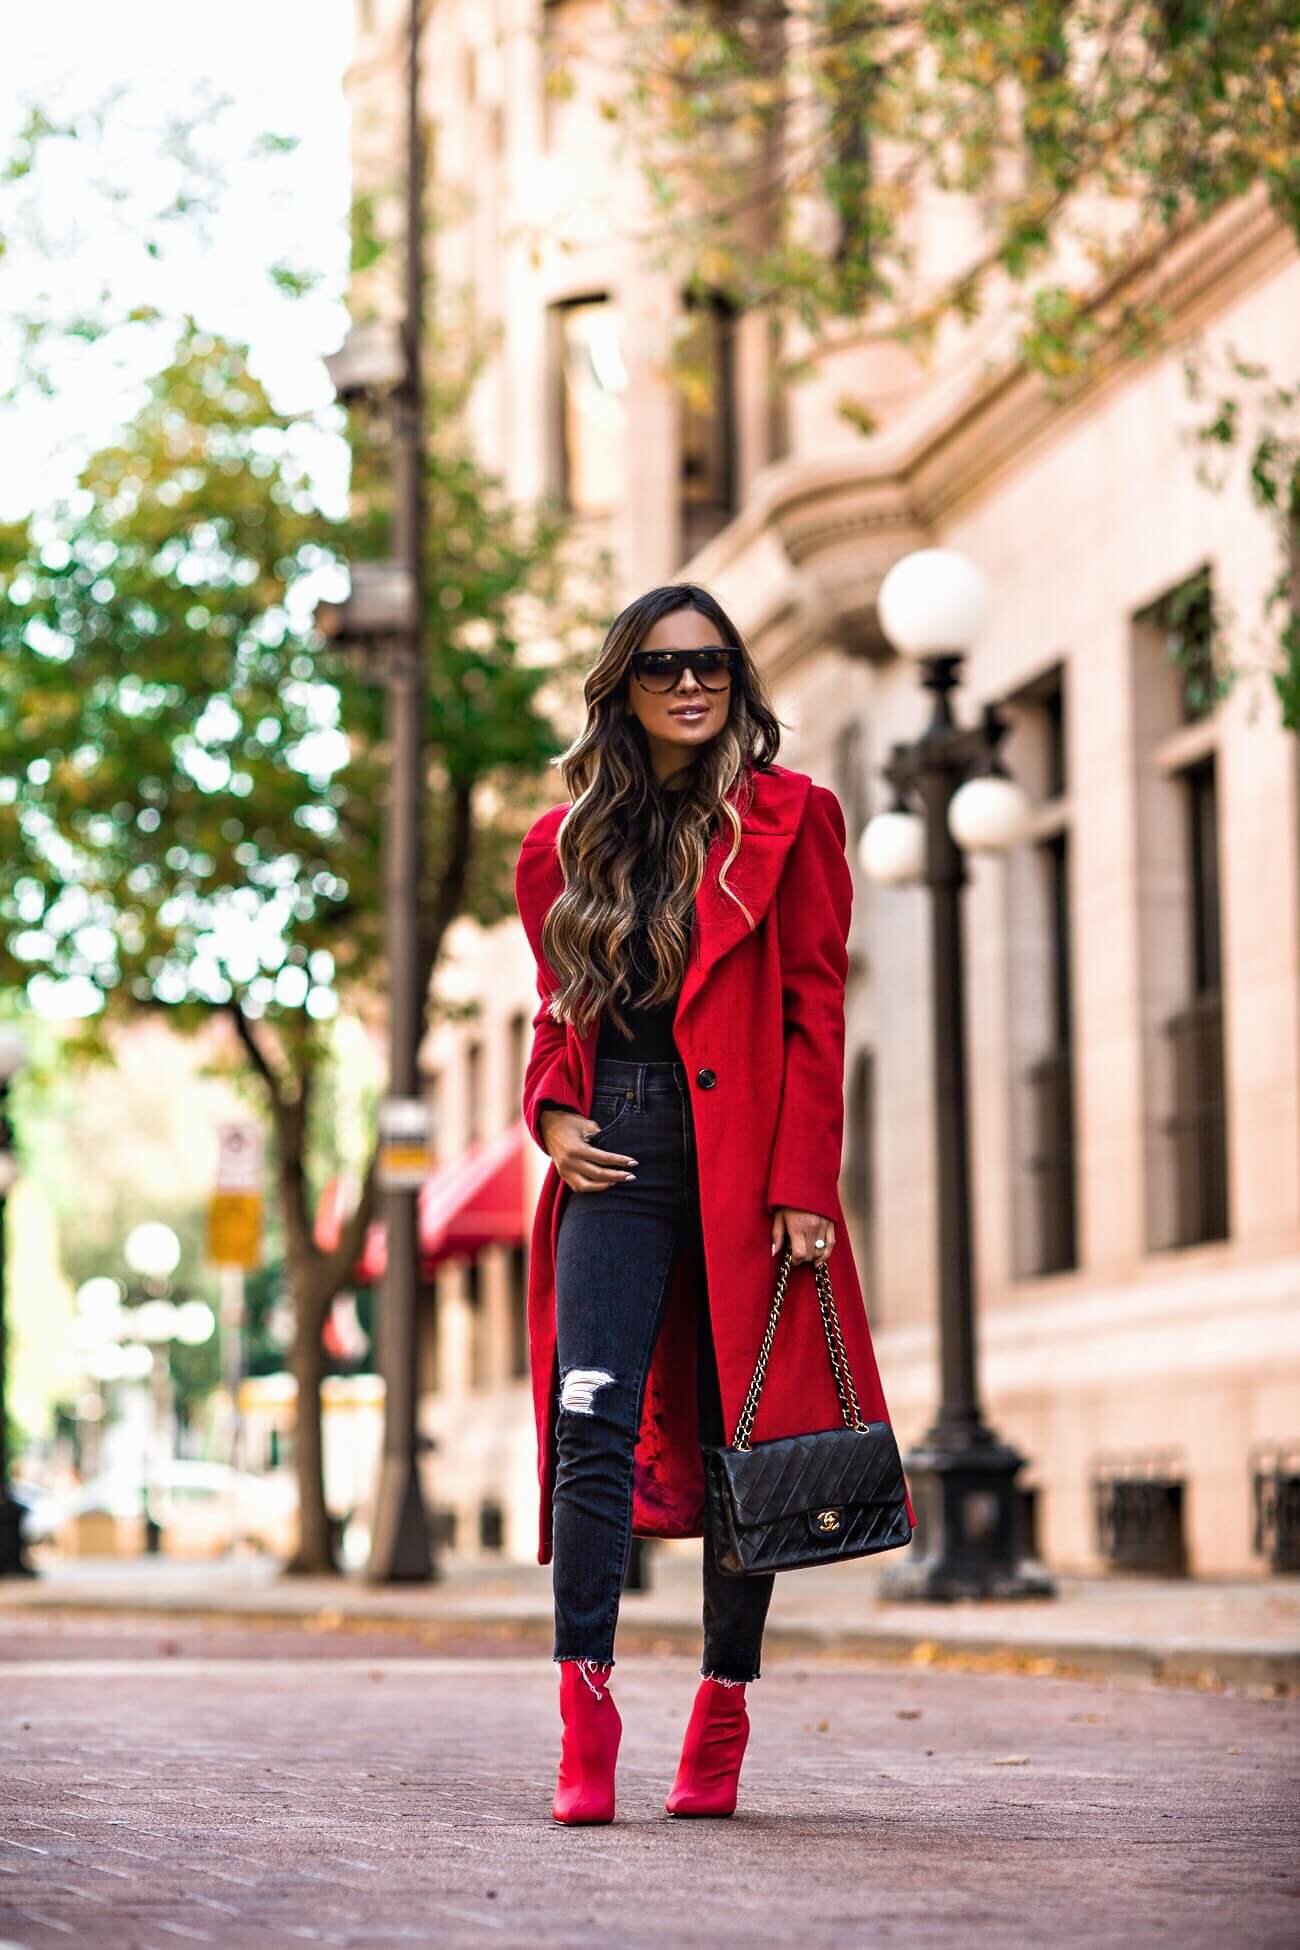 mia mia mine wearing a red coat from bloomingdale's and a chanel bag